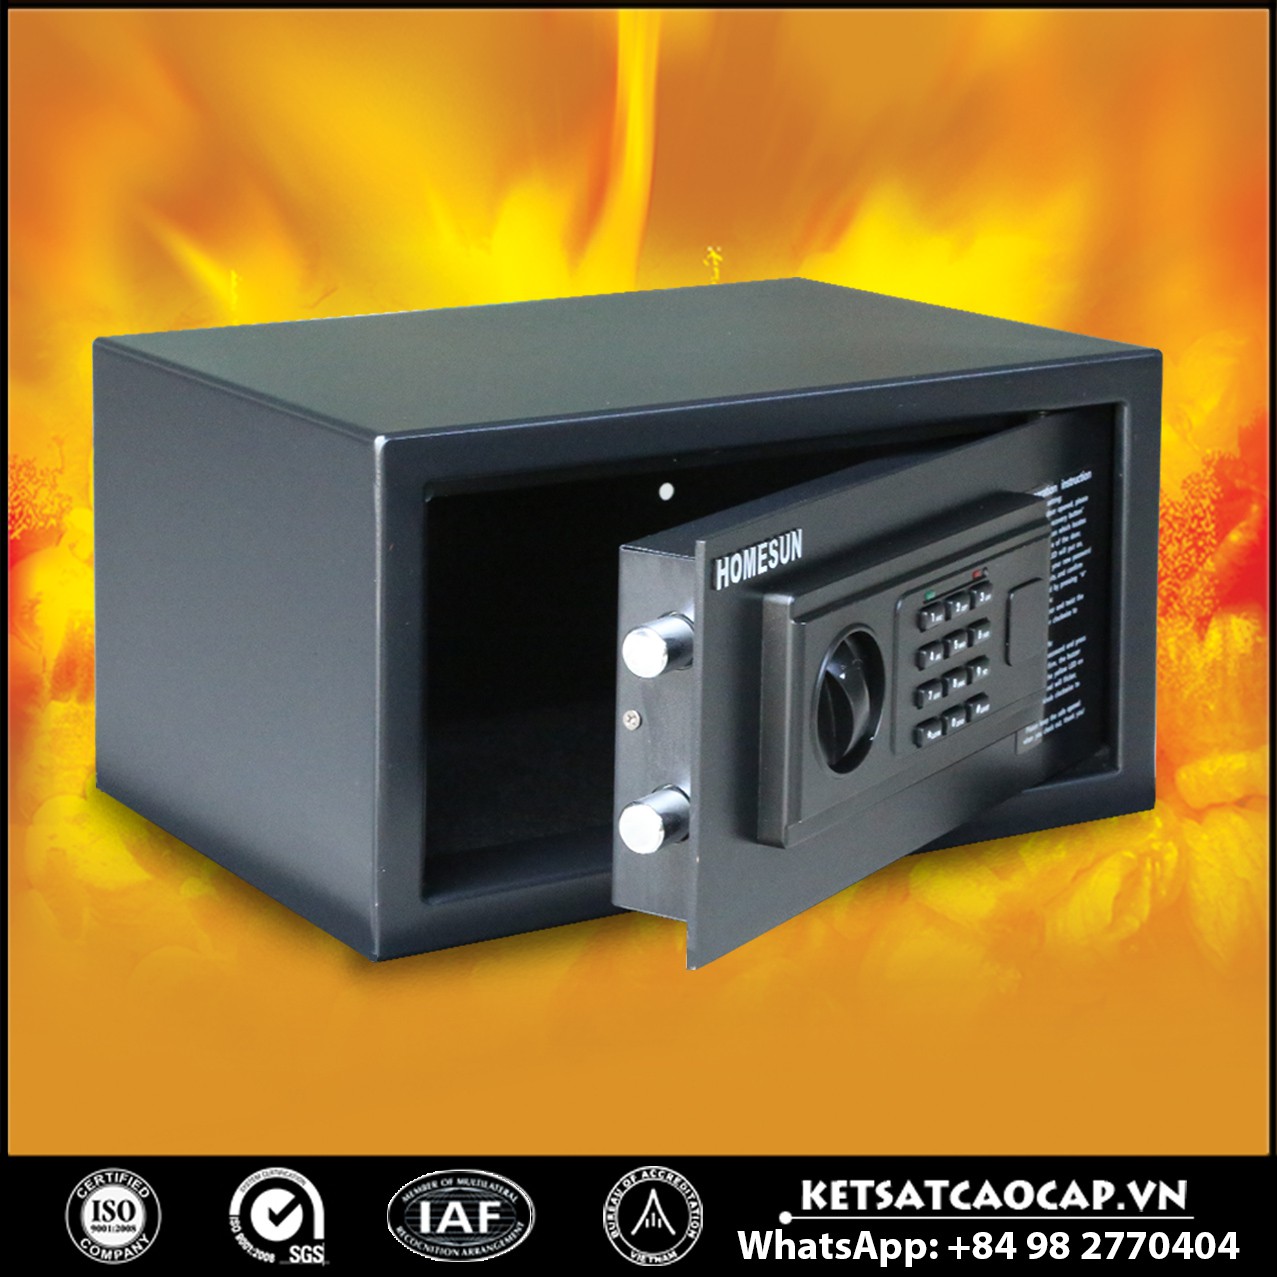 Hotel Safety Deposit Box Suppliers and Exporters - Leading Manufacturer